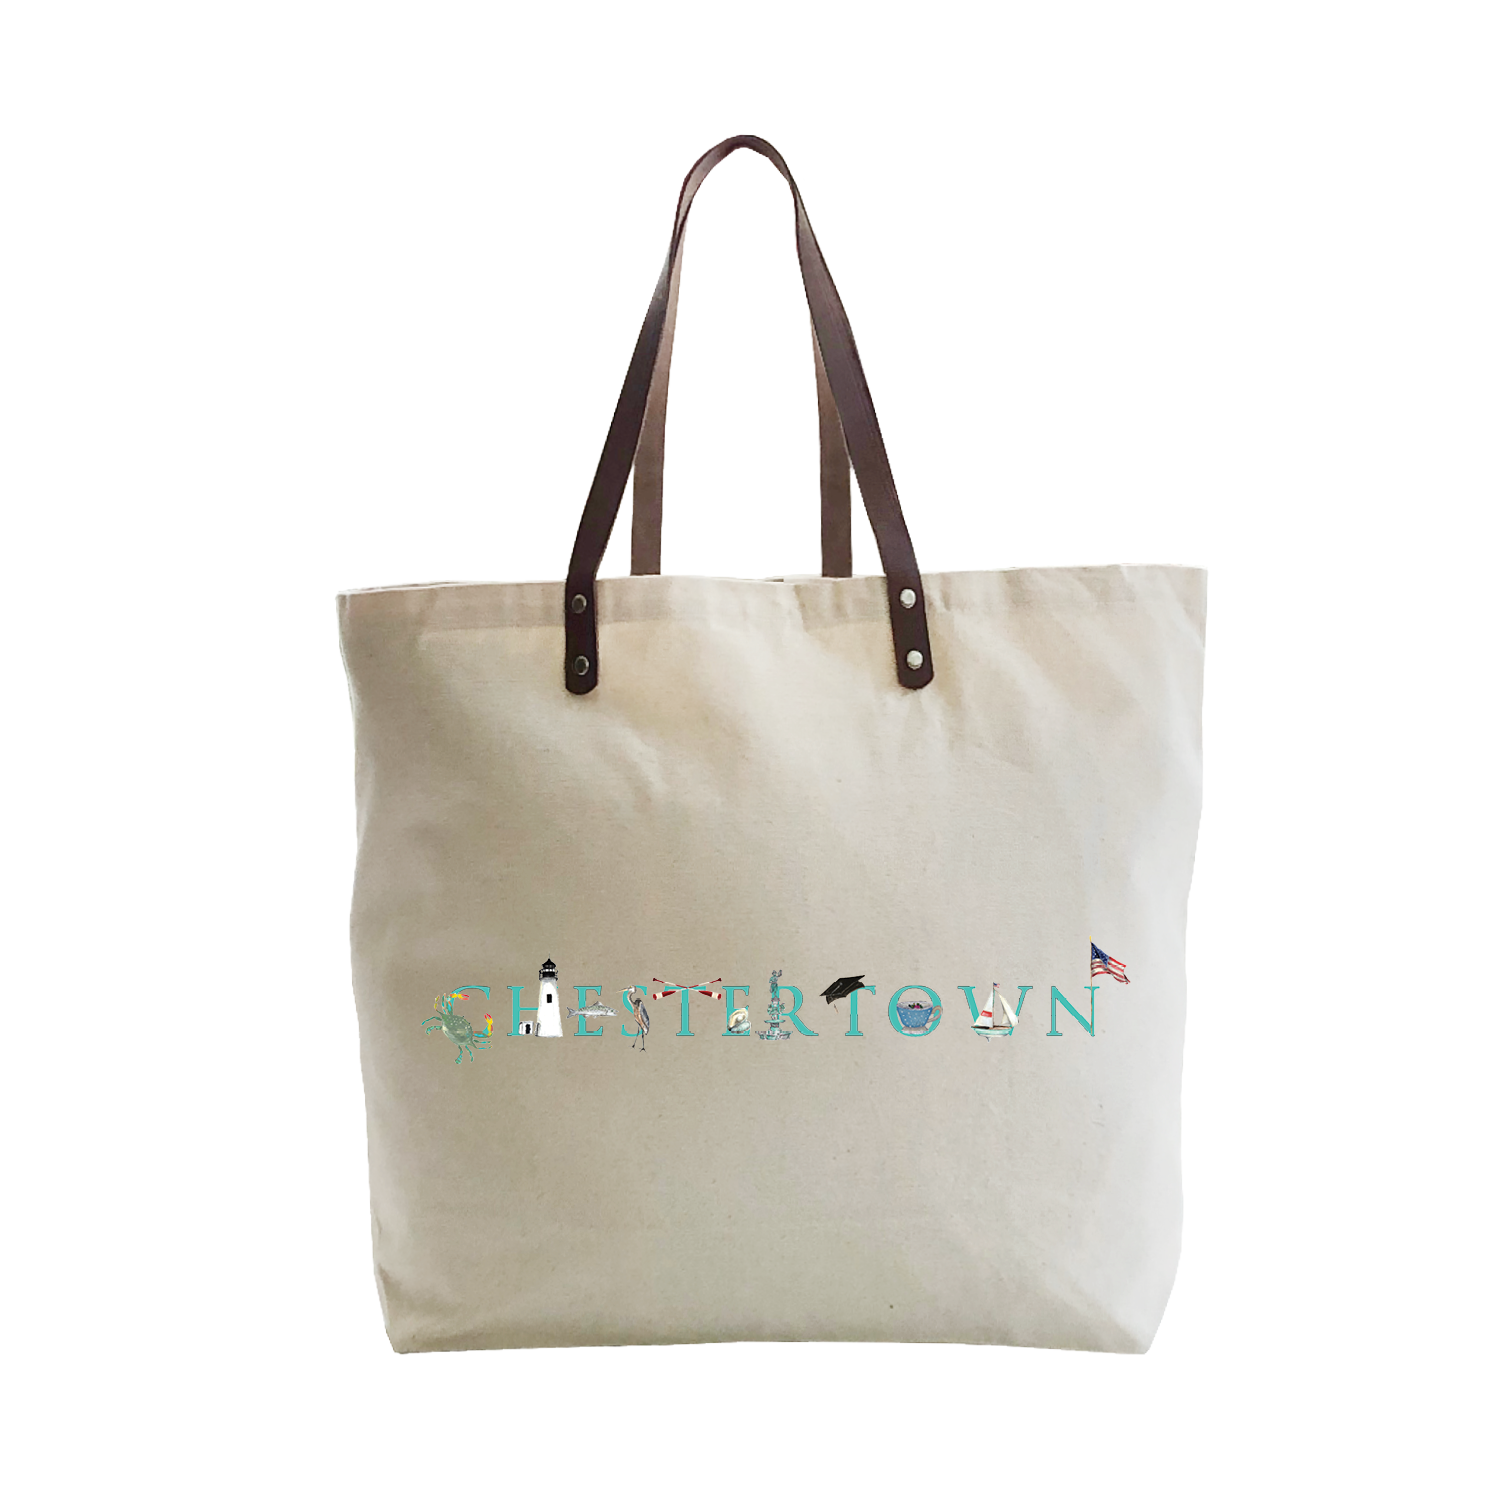 chestertown large tote